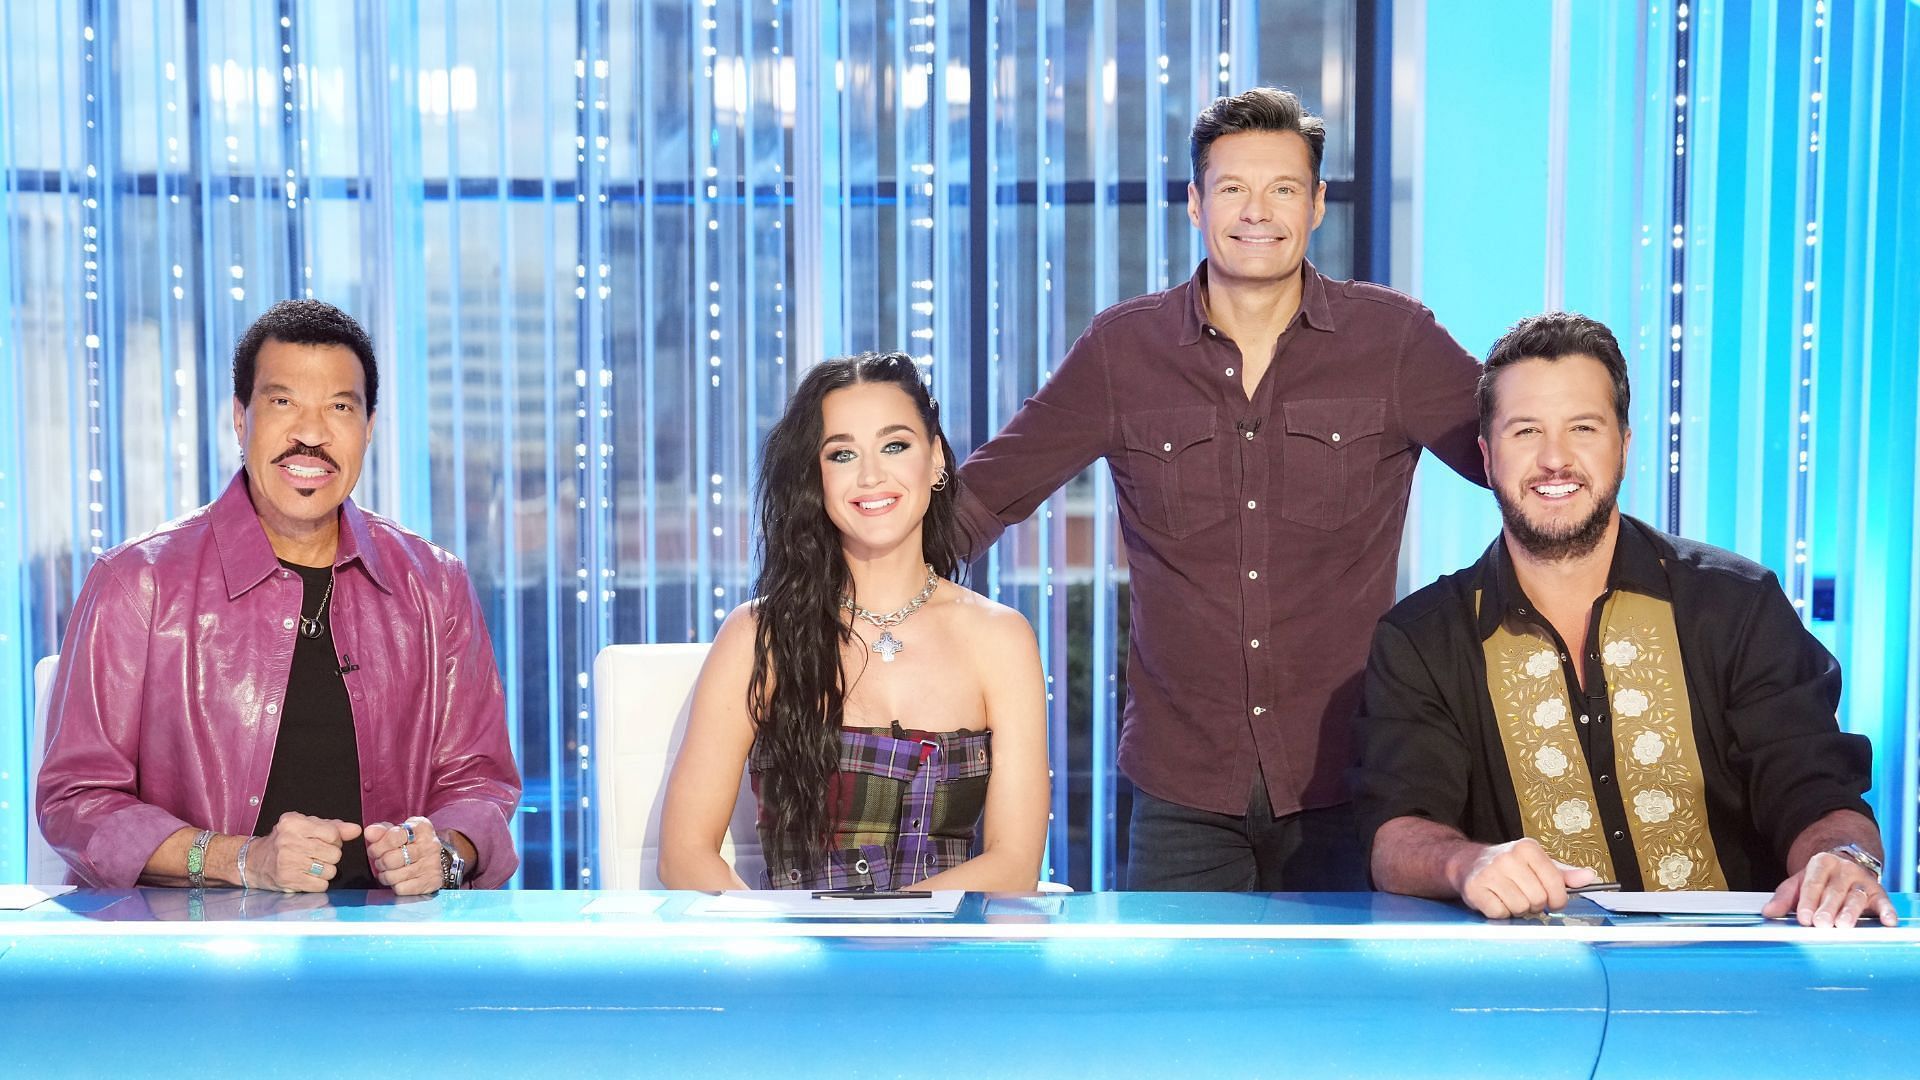 American Idol season 21 airs a new episode this Sunday